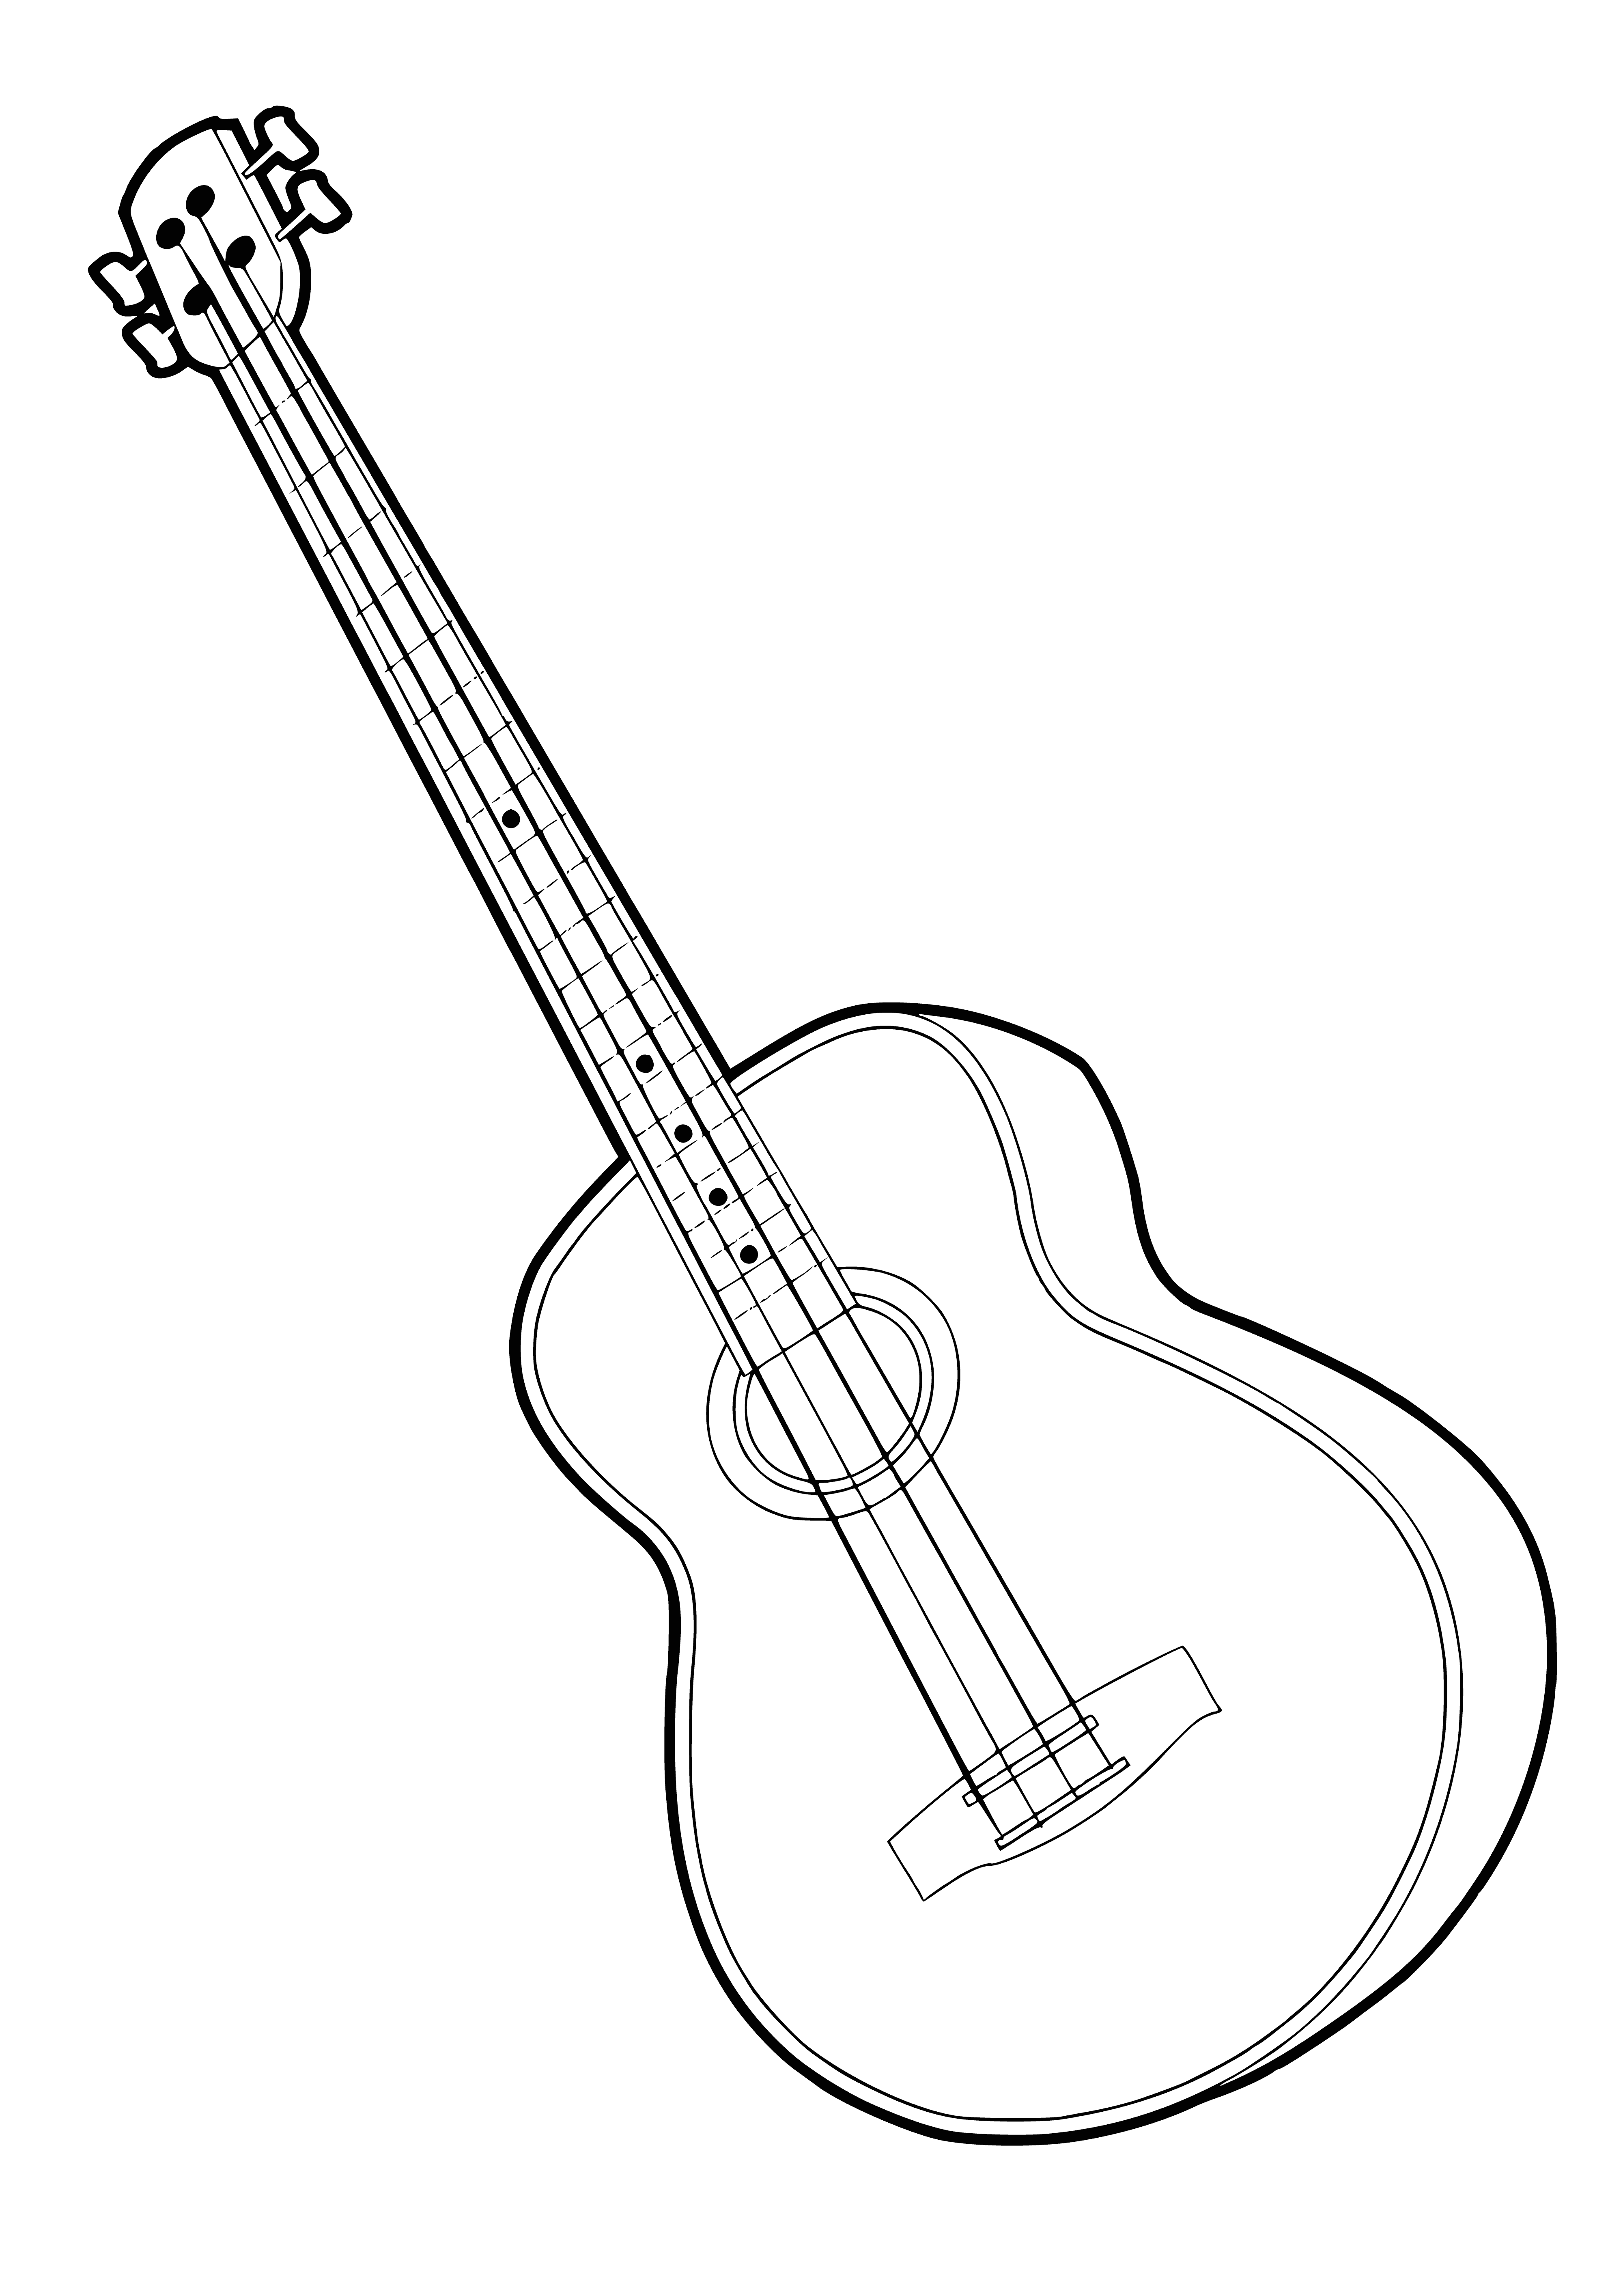 coloring page: Lying on wooden floor, a brownish-gold ukulele with 4 strings & white label.